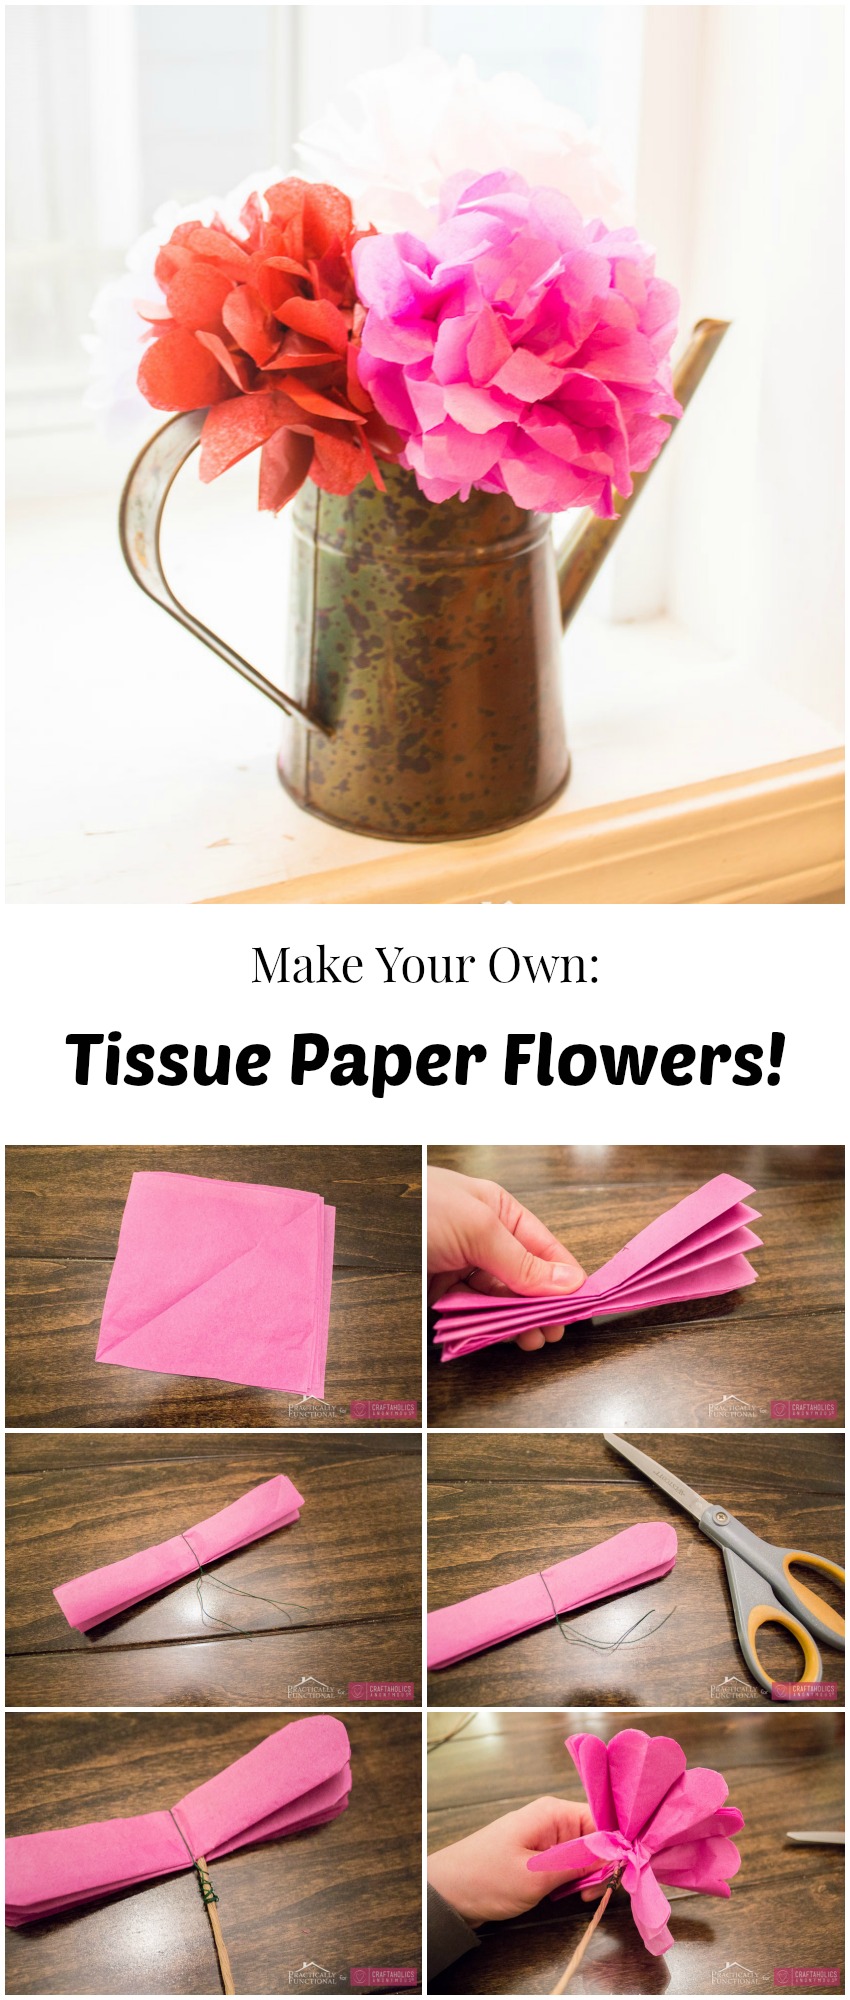 Tissue Paper Flowers tutorial. Perfect for weddings, decor, Valentine's Day, spring. Last so much longer than real ones!